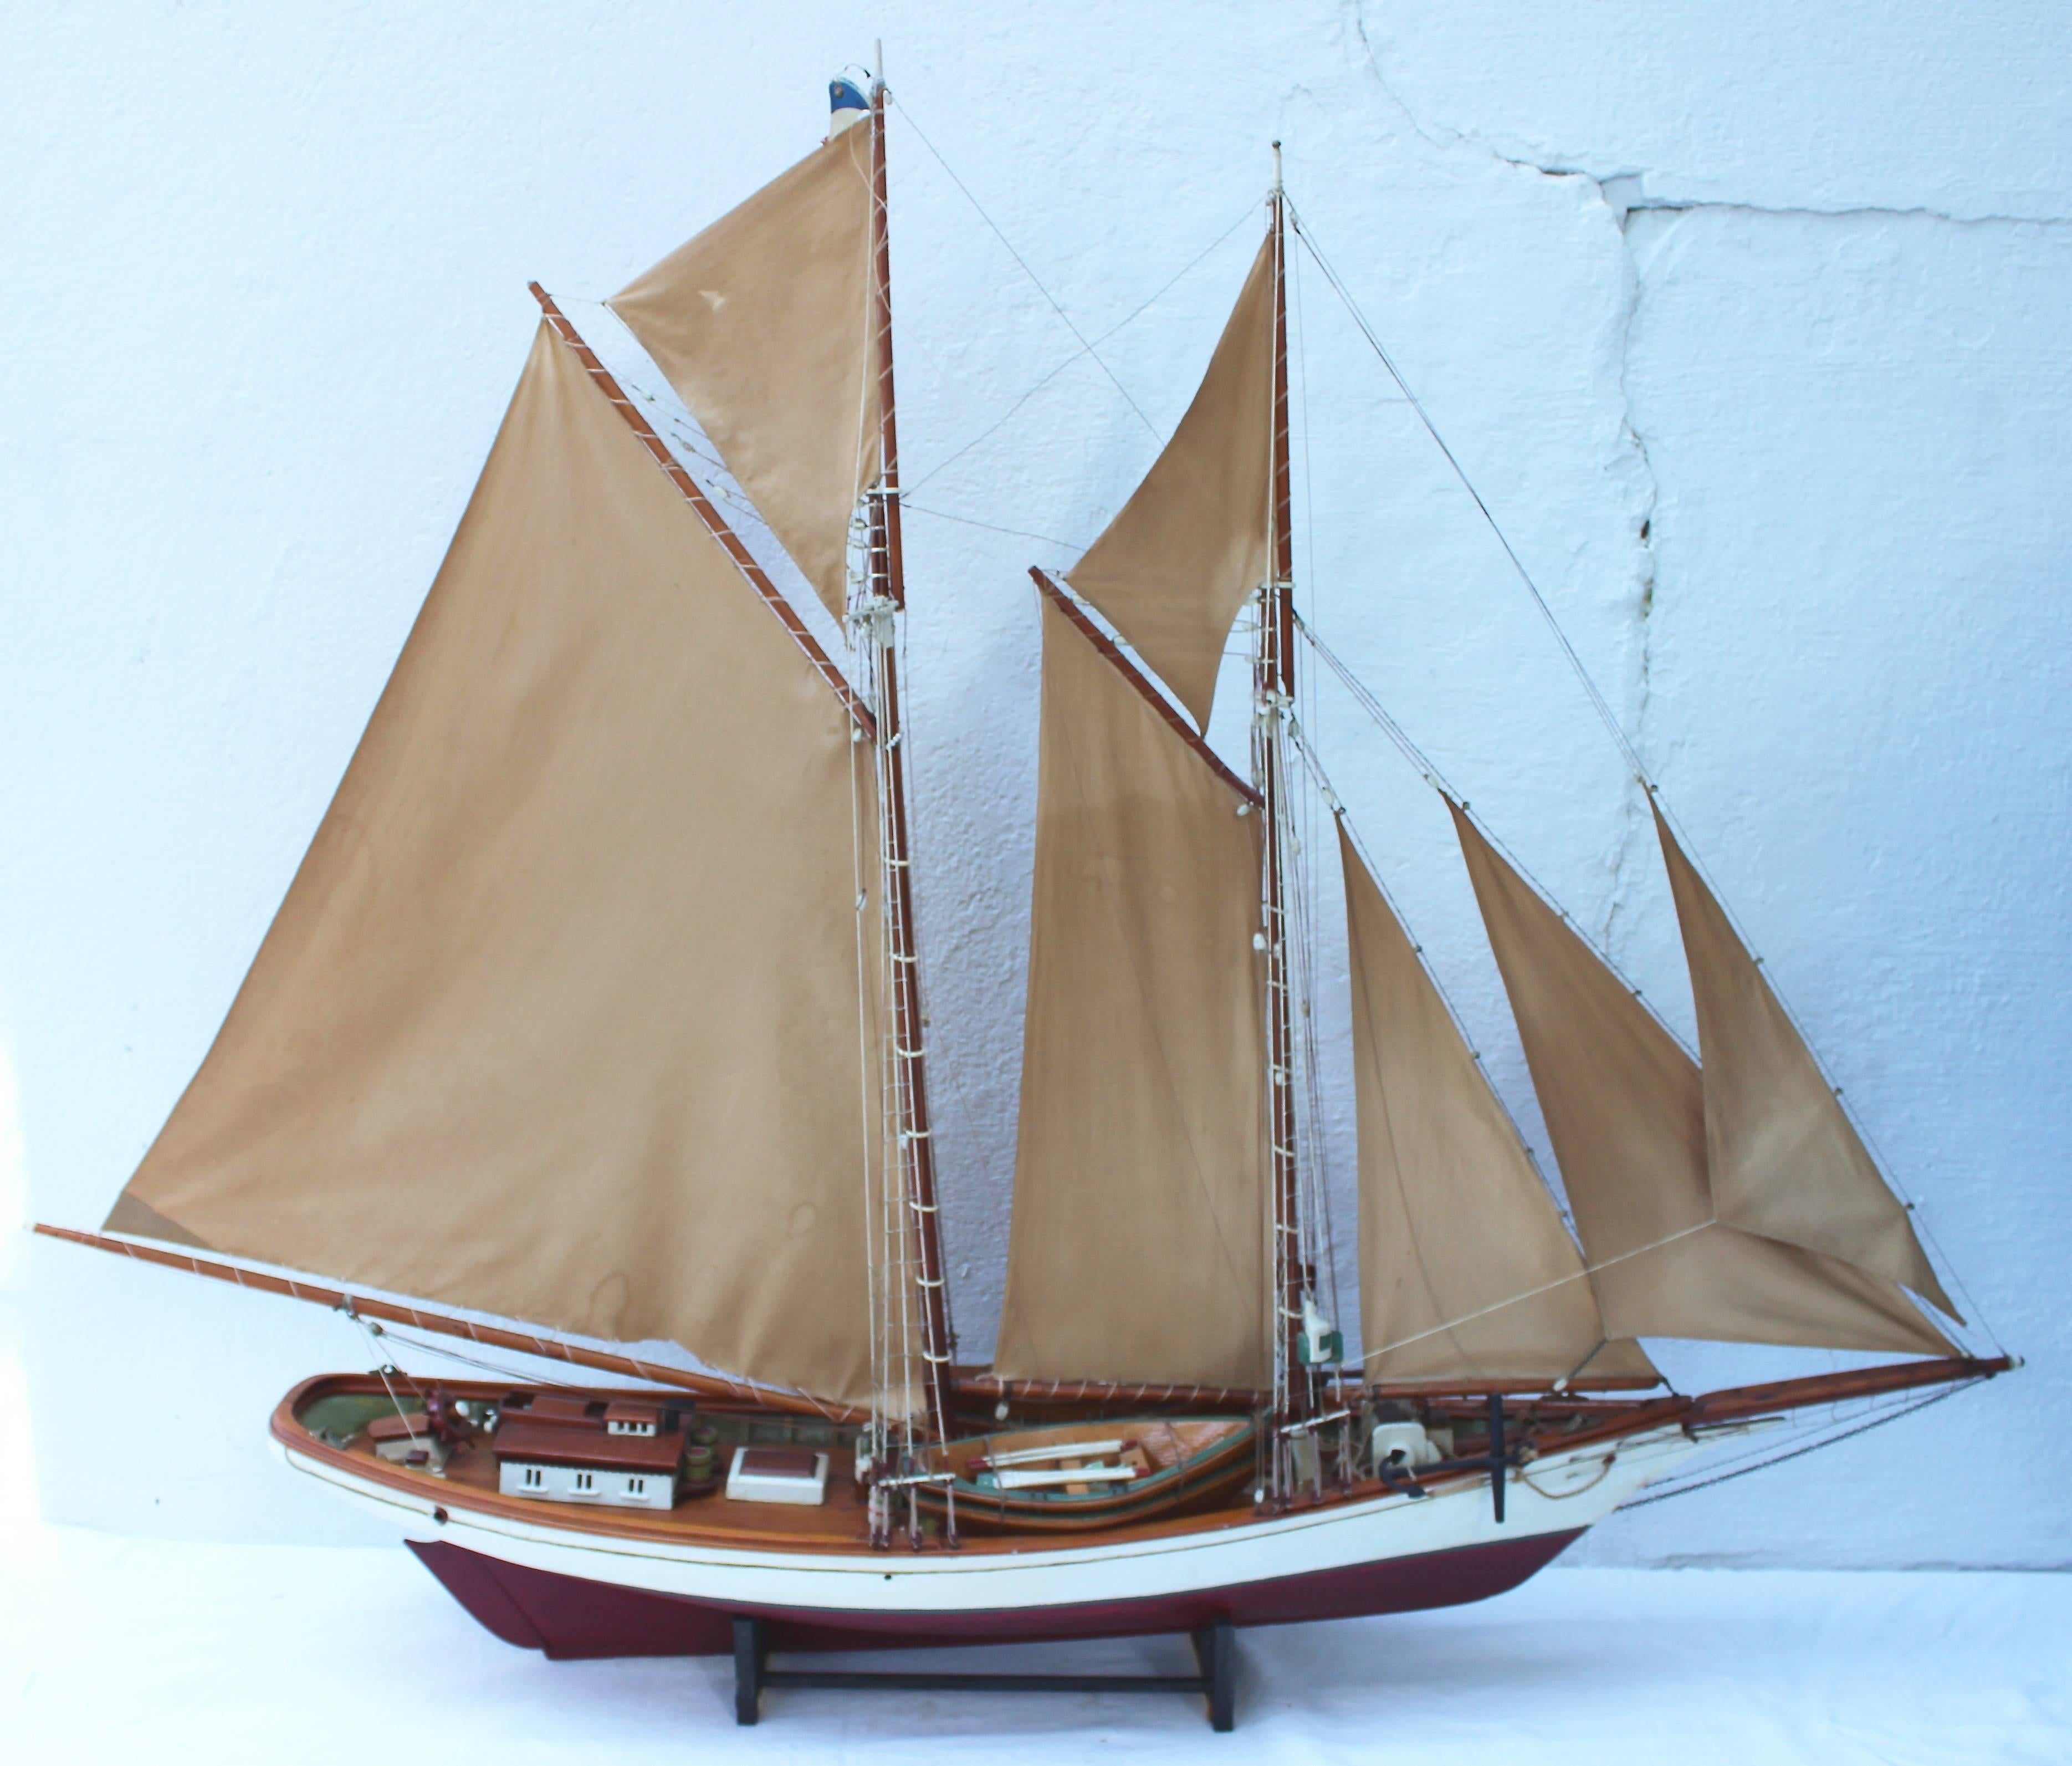 Impressive model sailboat from the Philadelphia Seaport Museum with full rigging and sails and painted wood hull.